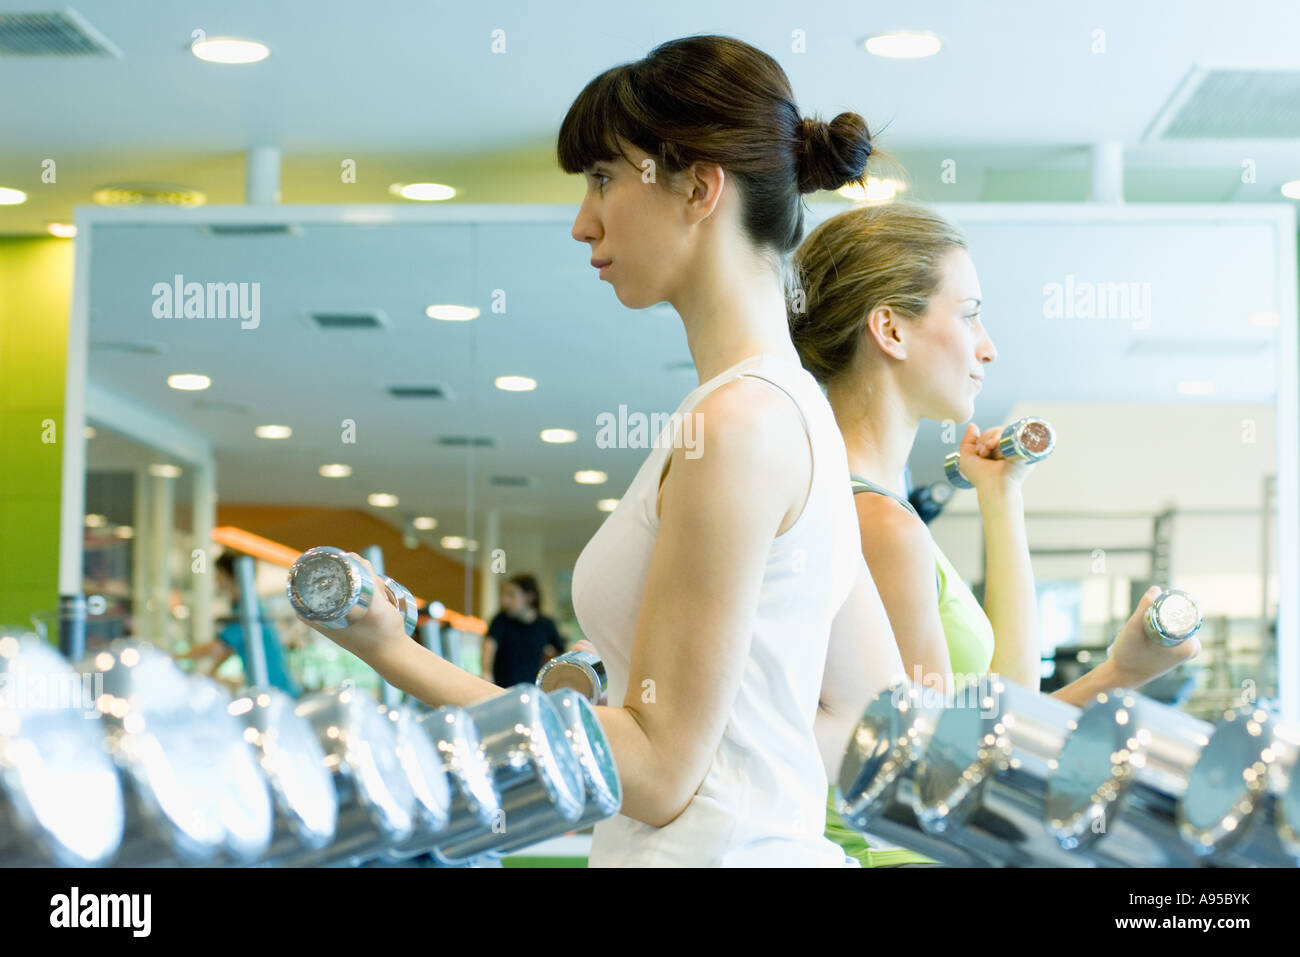 Two women working out with dumbbells Stock Photo